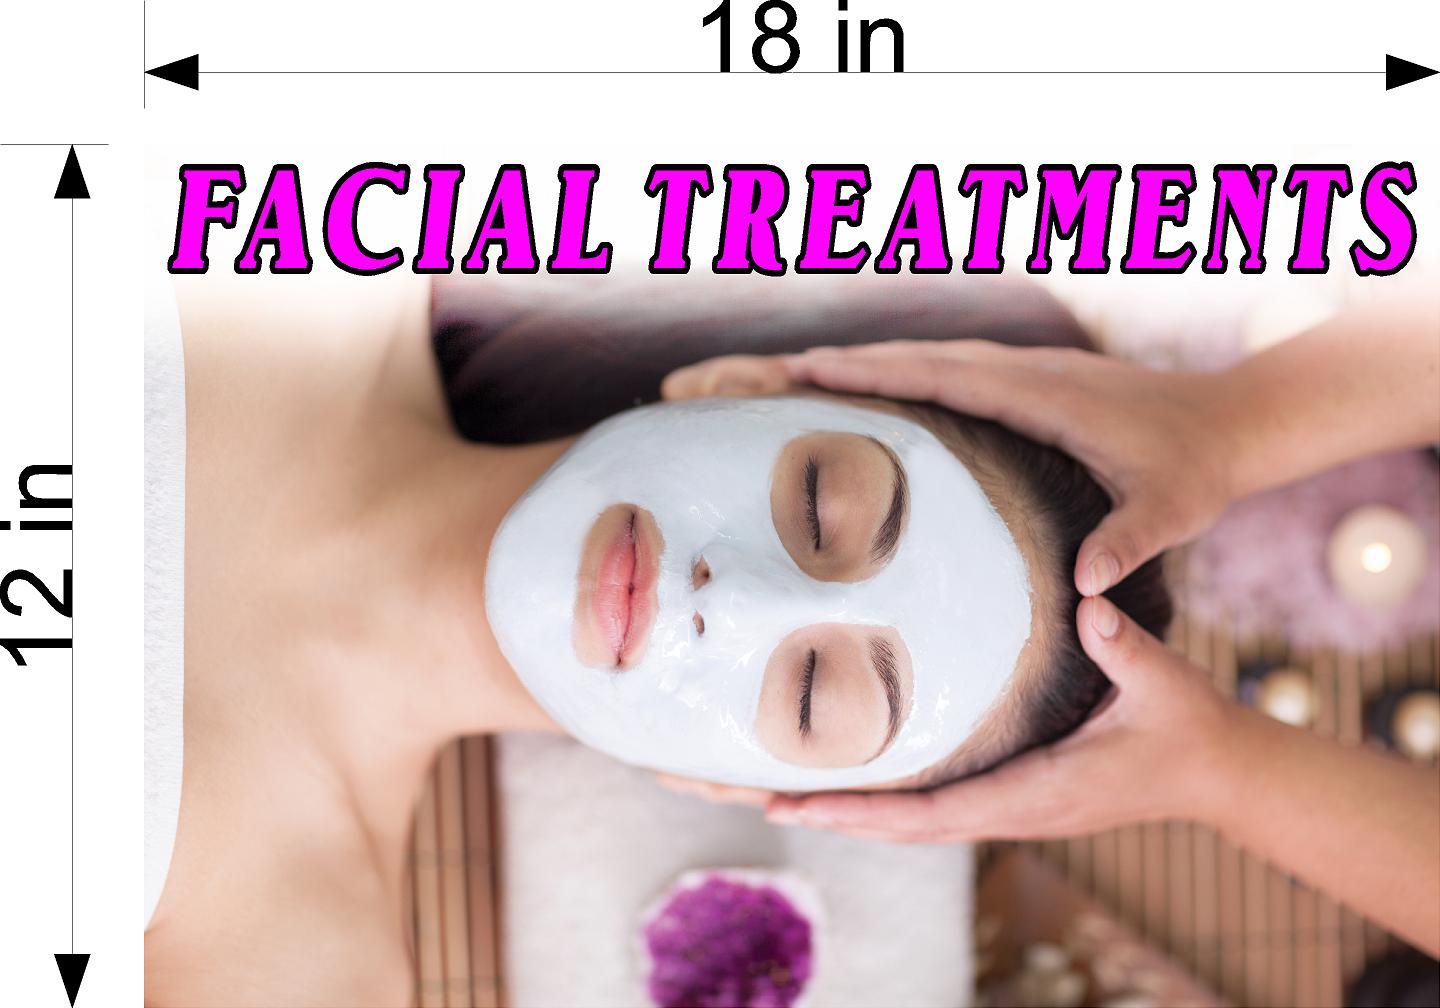 Facial 07 Wallpaper Poster Decal with Adhesive Backing Wall Sticker Decor Day Spa Horizontal